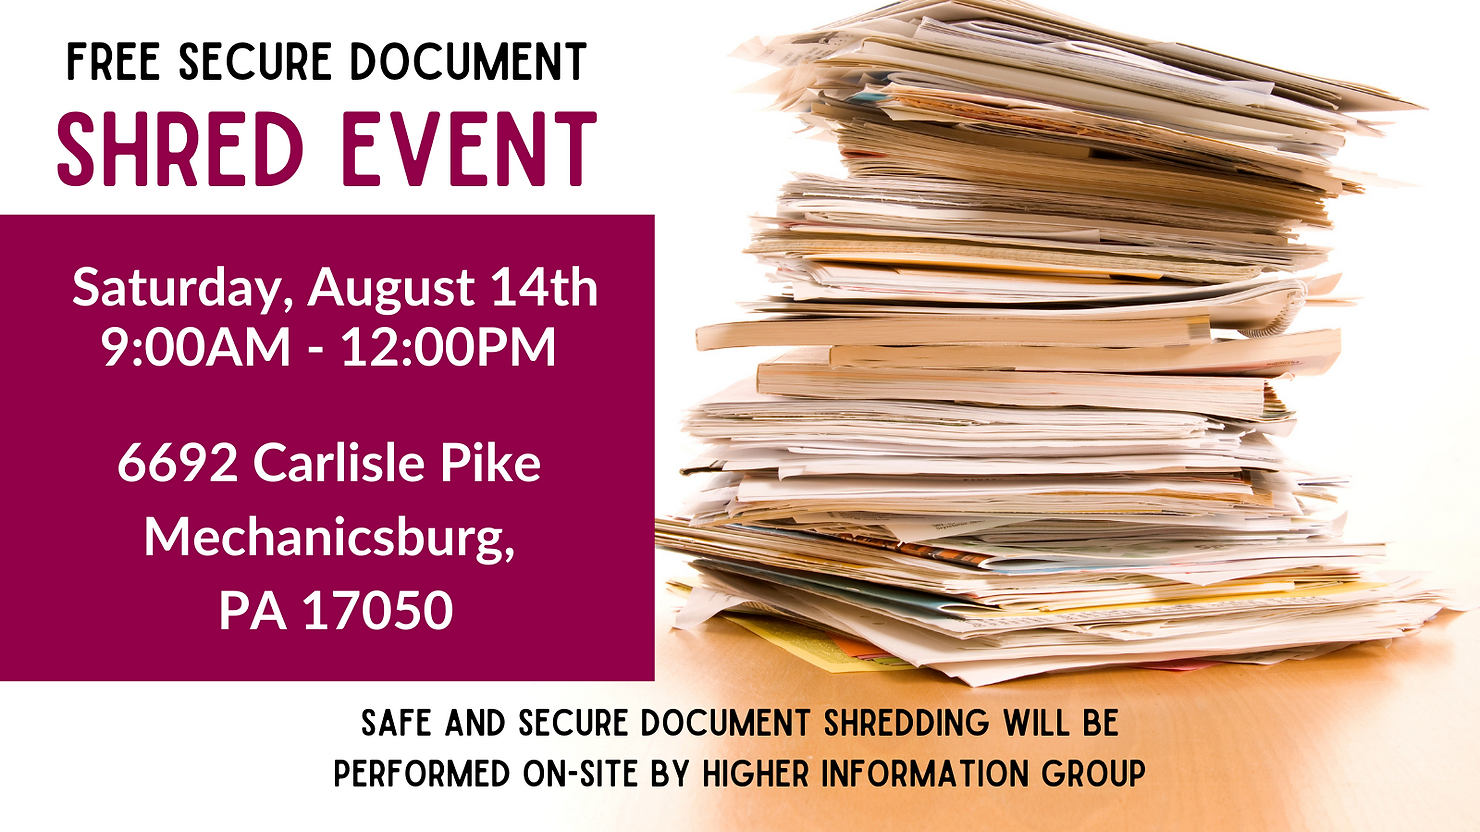 Come visit NCFCU at our local FREE document shredding events! featured image